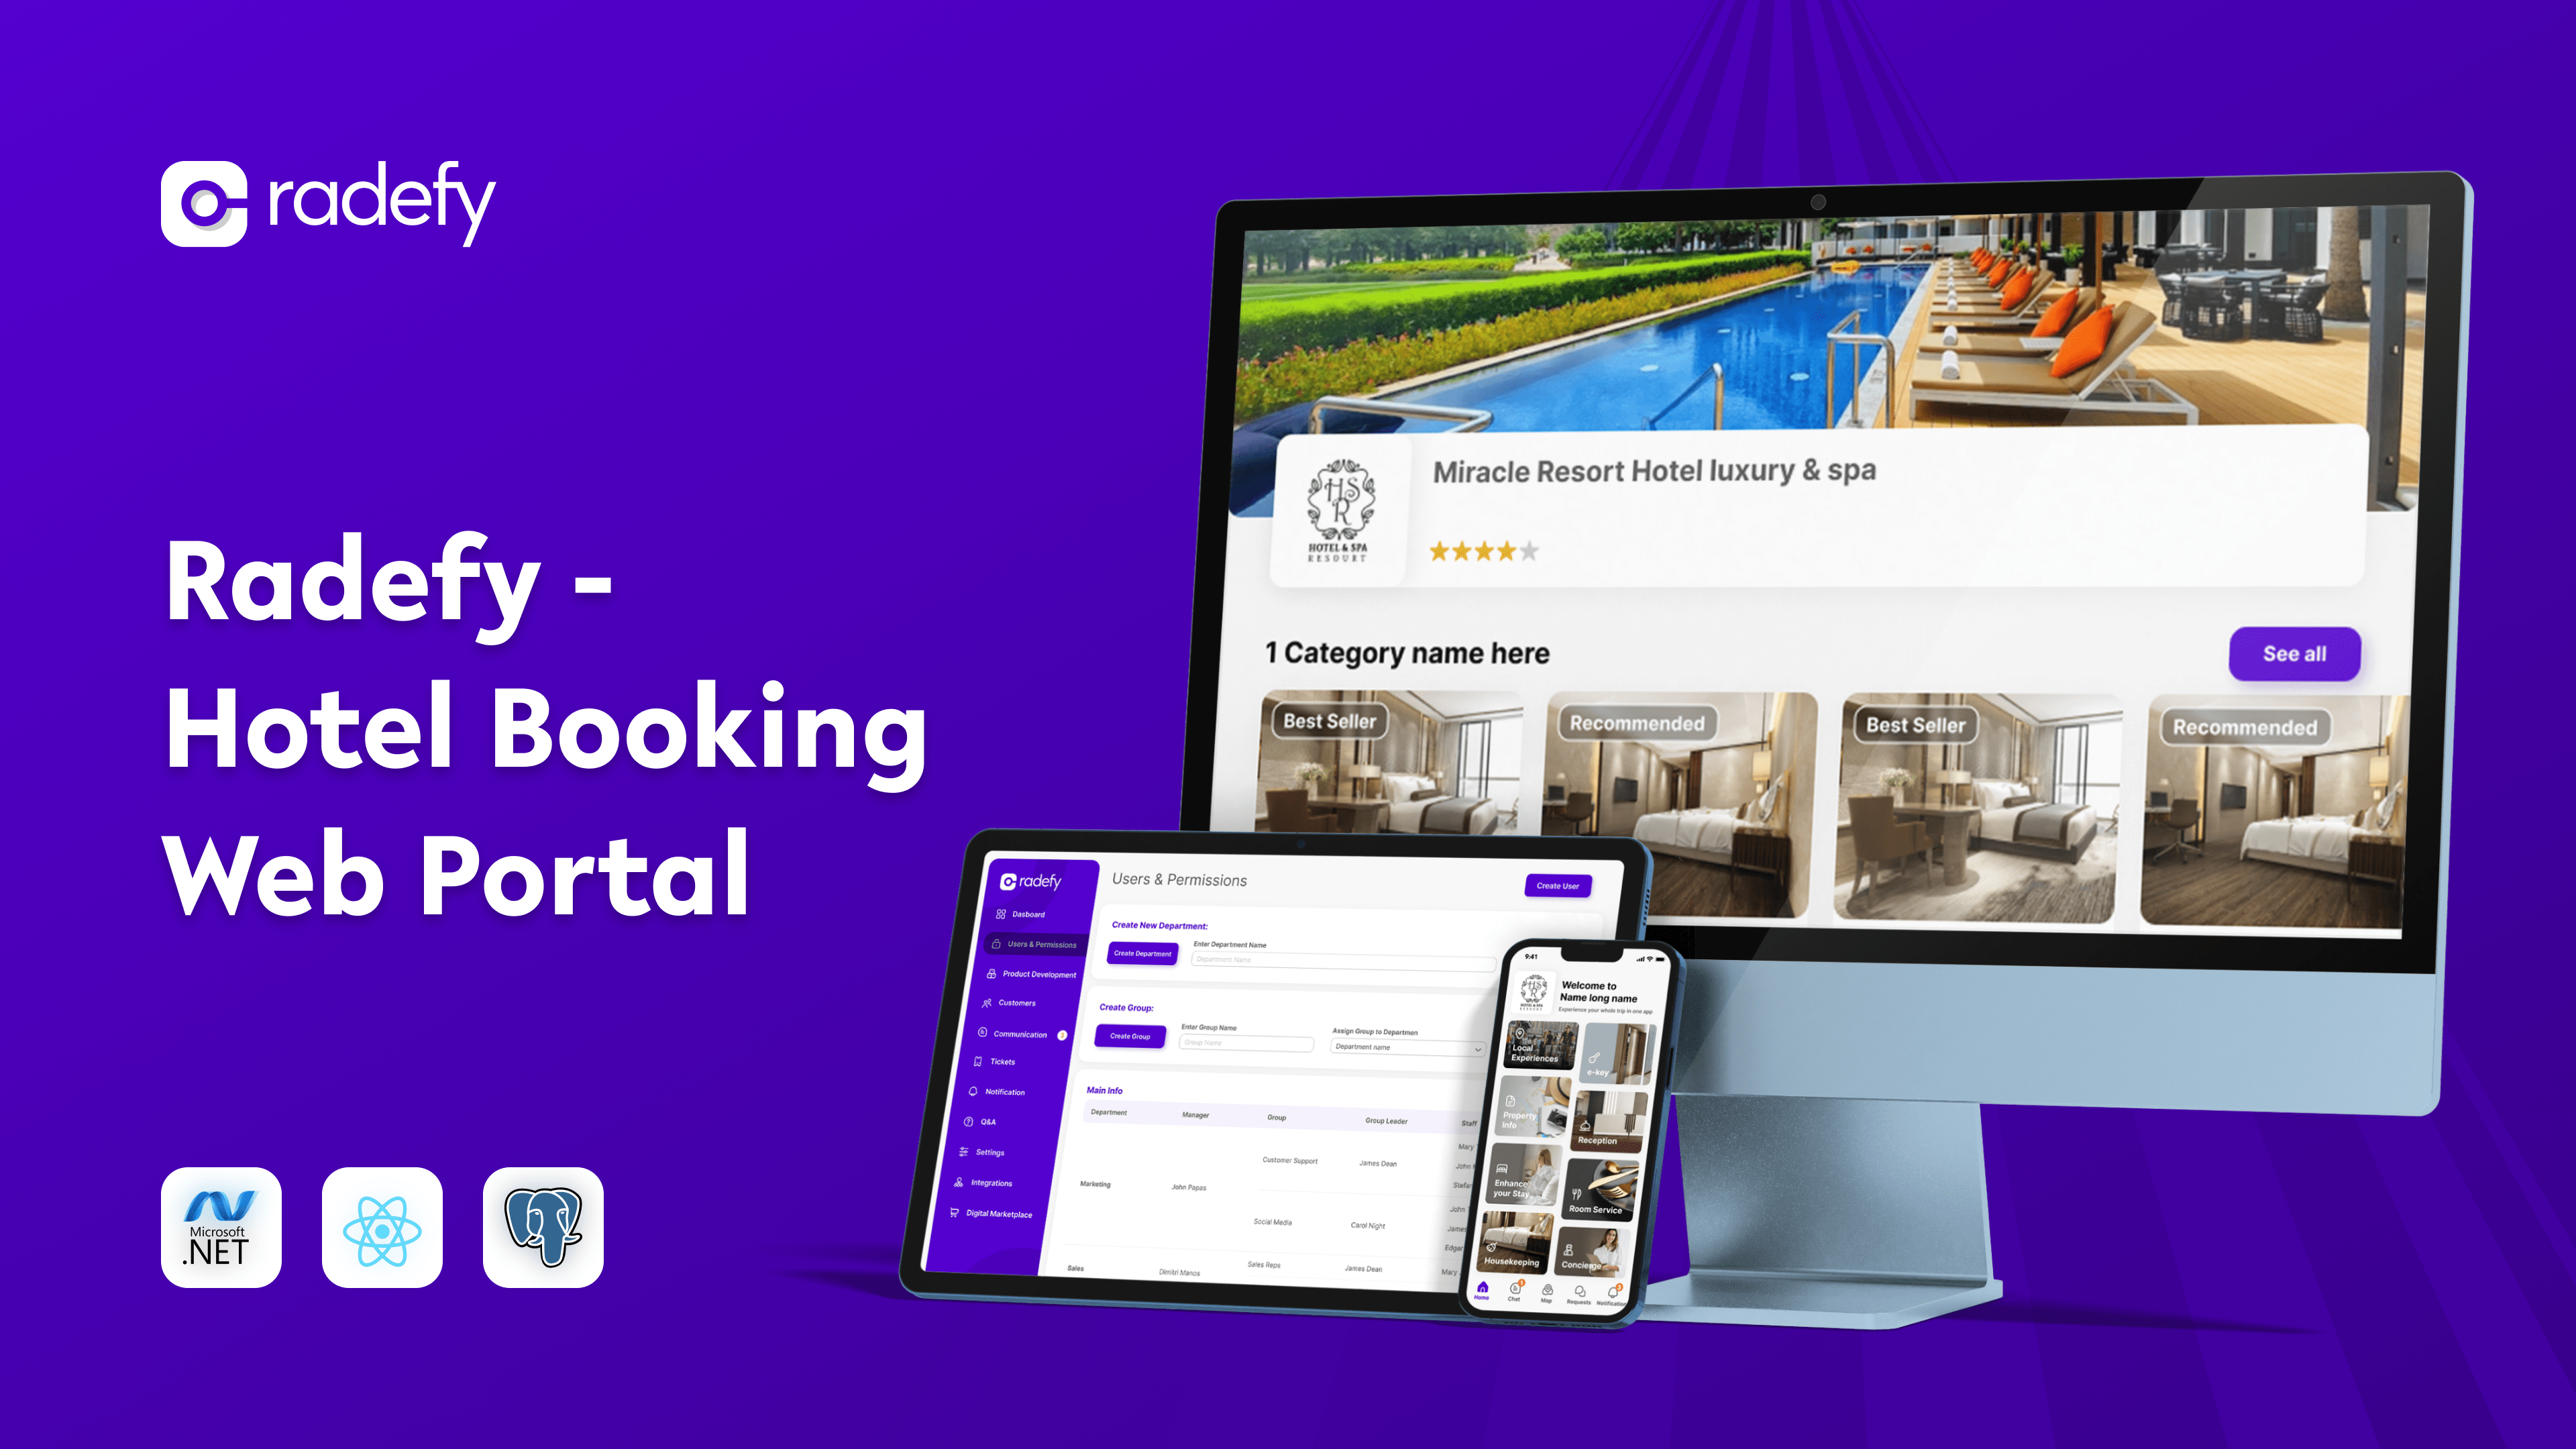 a radefy hotel booking web portal is displayed on a purple background